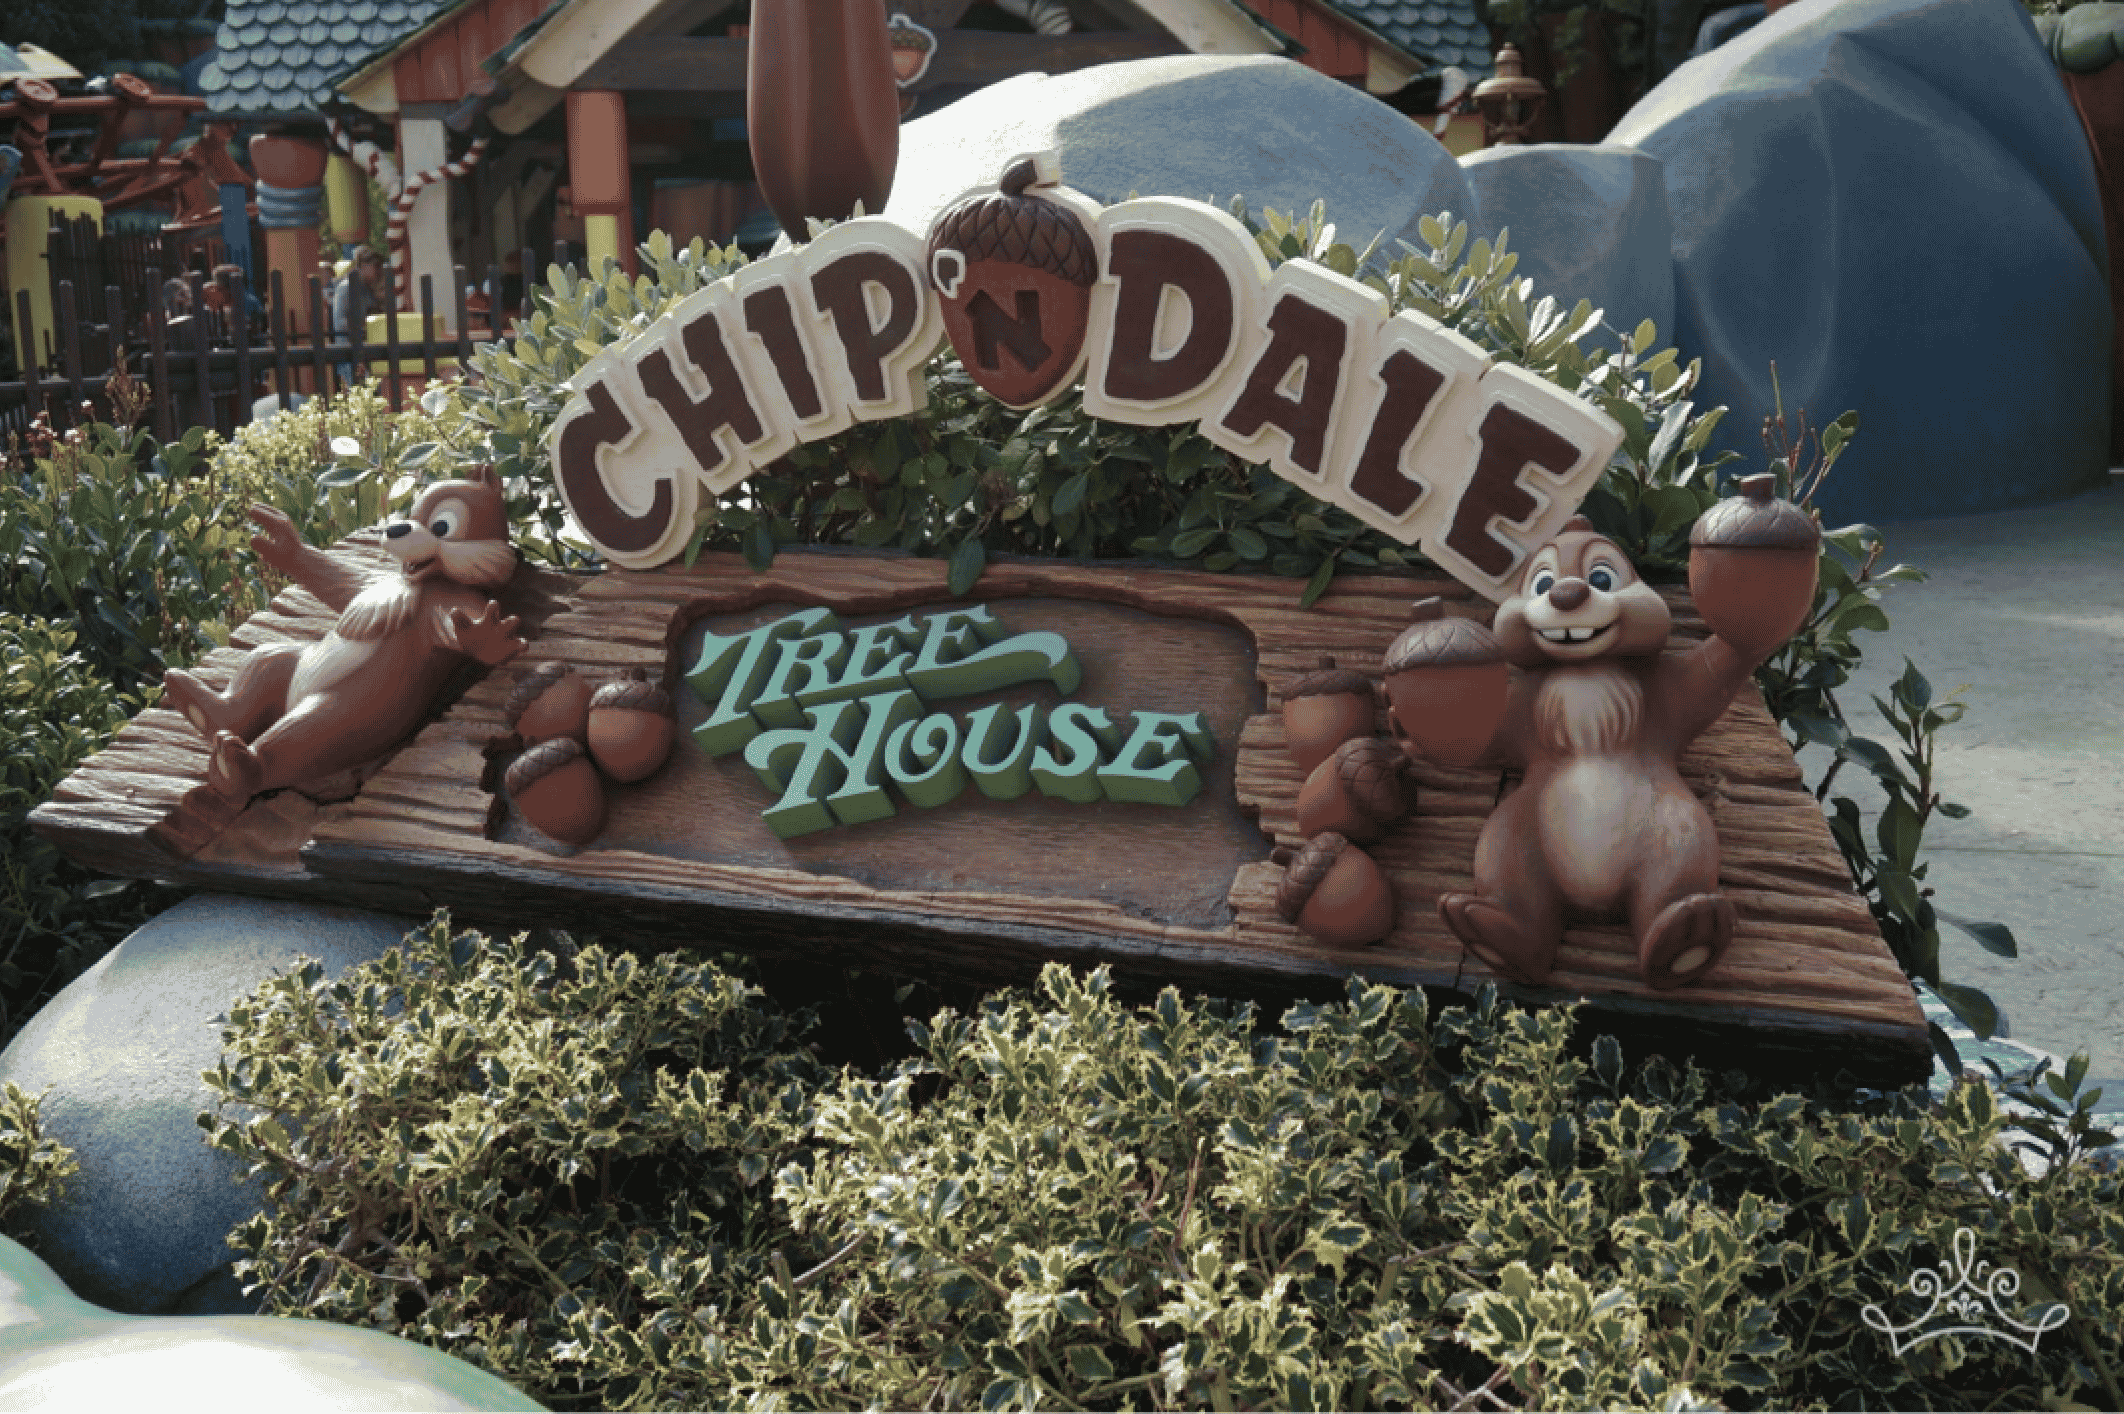 Chip 'n' Dale Treehouse